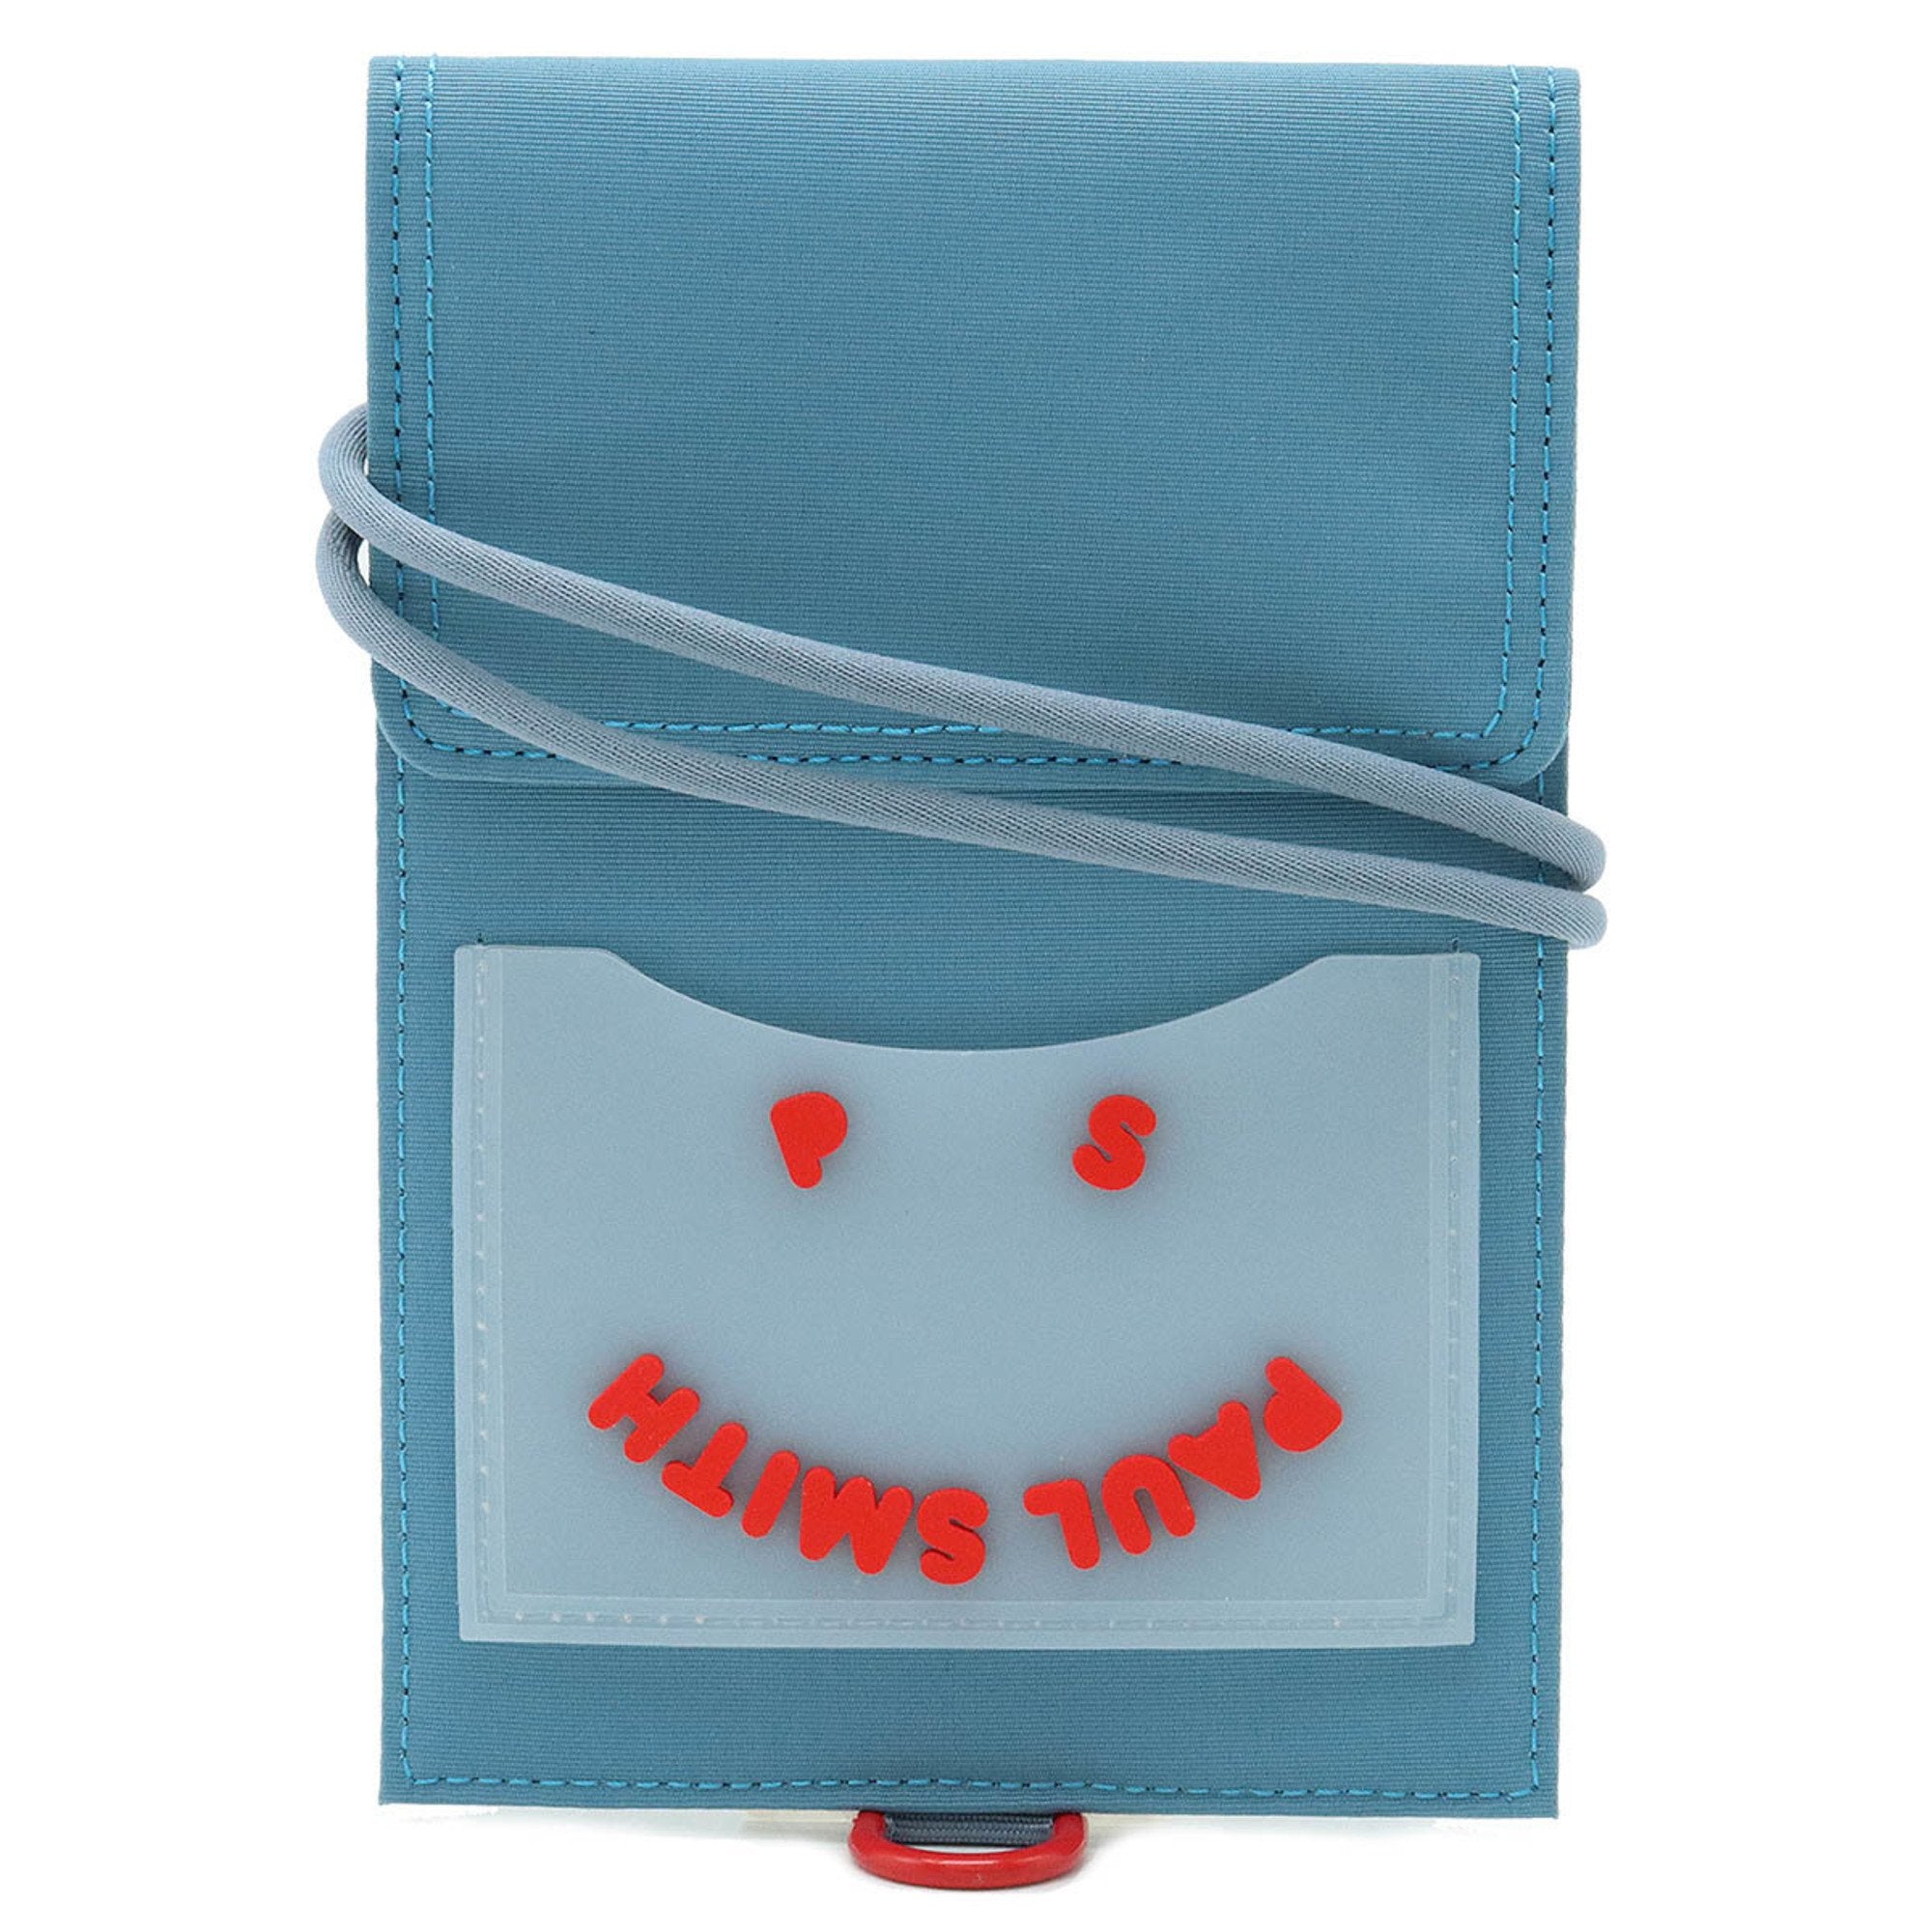 PS By Happy Face Neck Pouch Polyester Light Blue M2A 6822